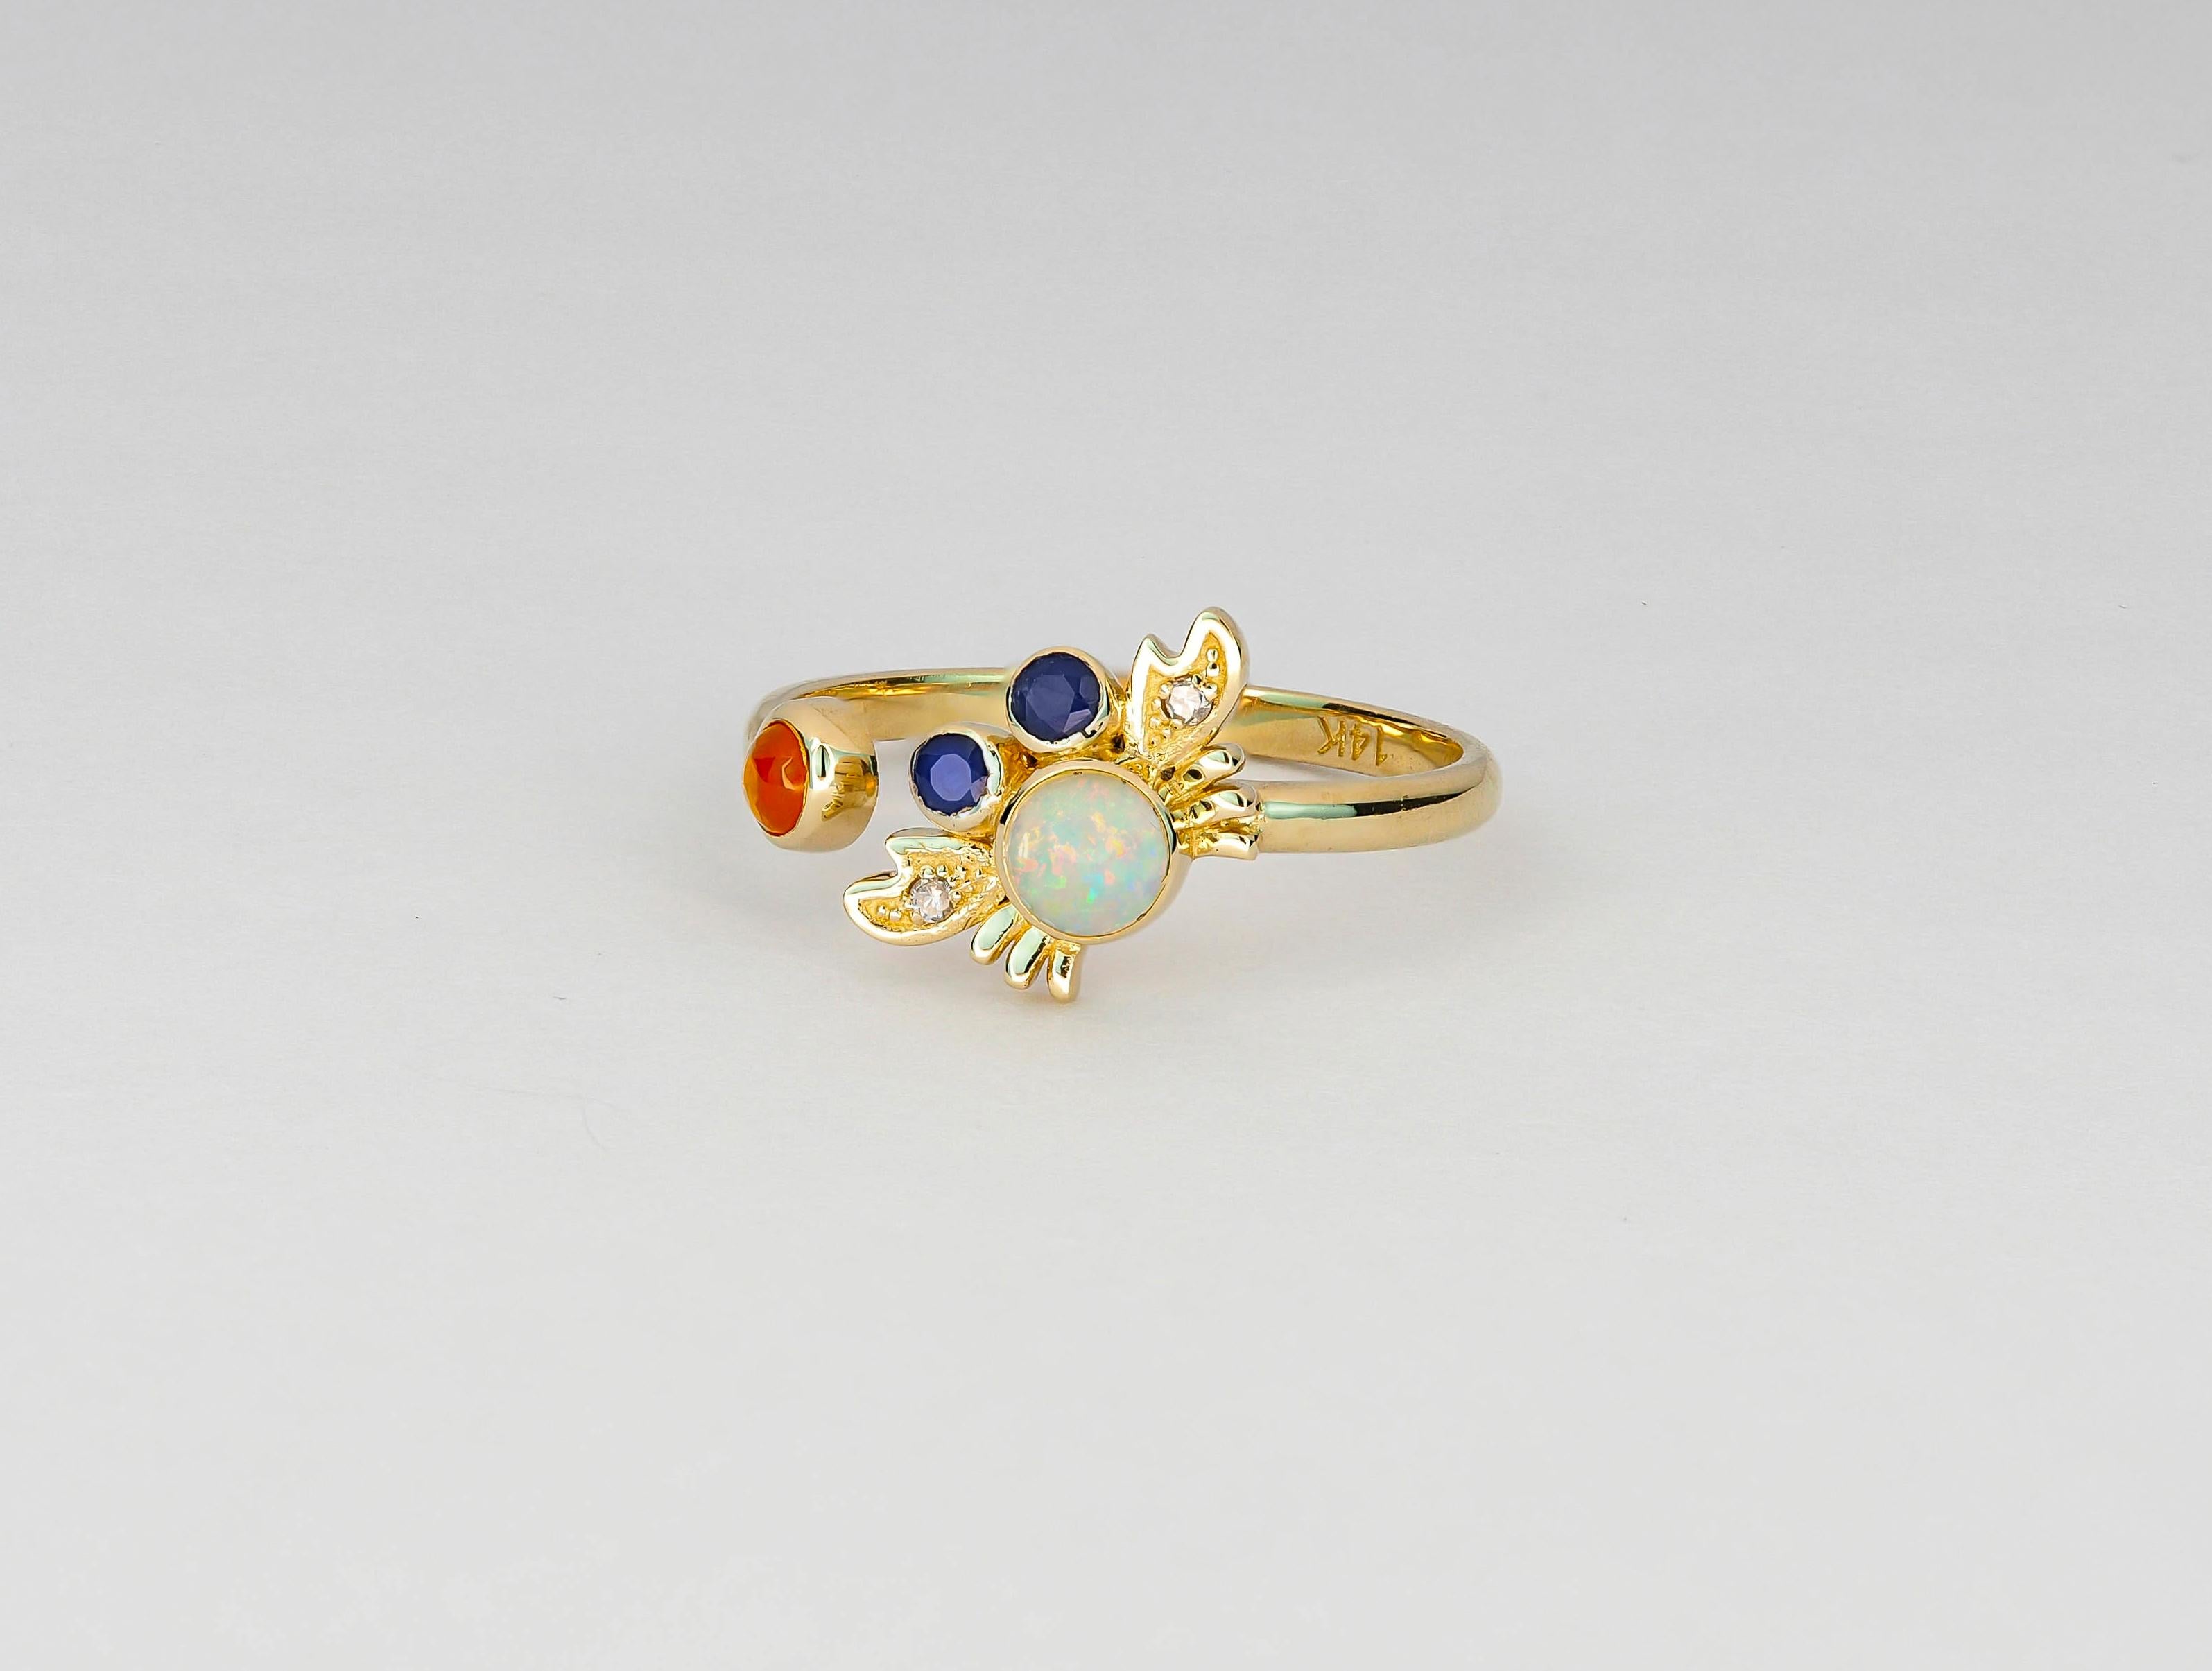 Modern 14k Funny Crab Gold Ring with Opal, Sapphires and Diamonds